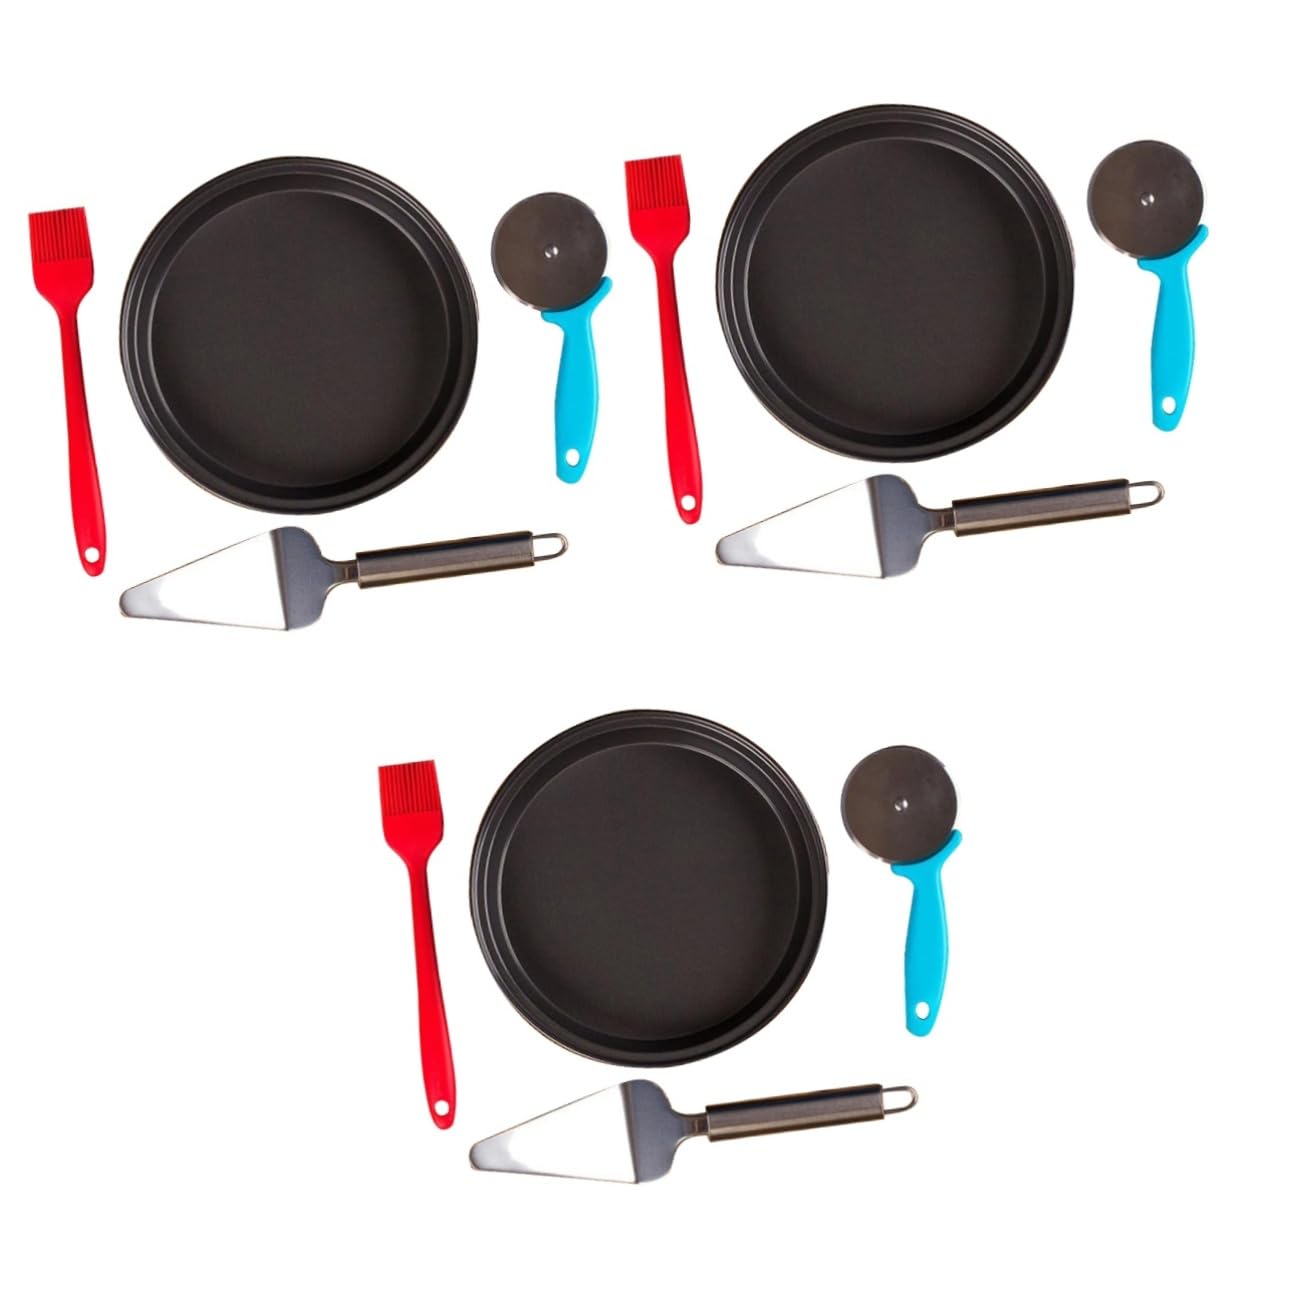 BESTOYARD 3pcs Set griddle grill accessories silicone brush baking tools pizza tray oven tray Baking Supplies cake spatula household Stainless steel pizza plate pizza machine